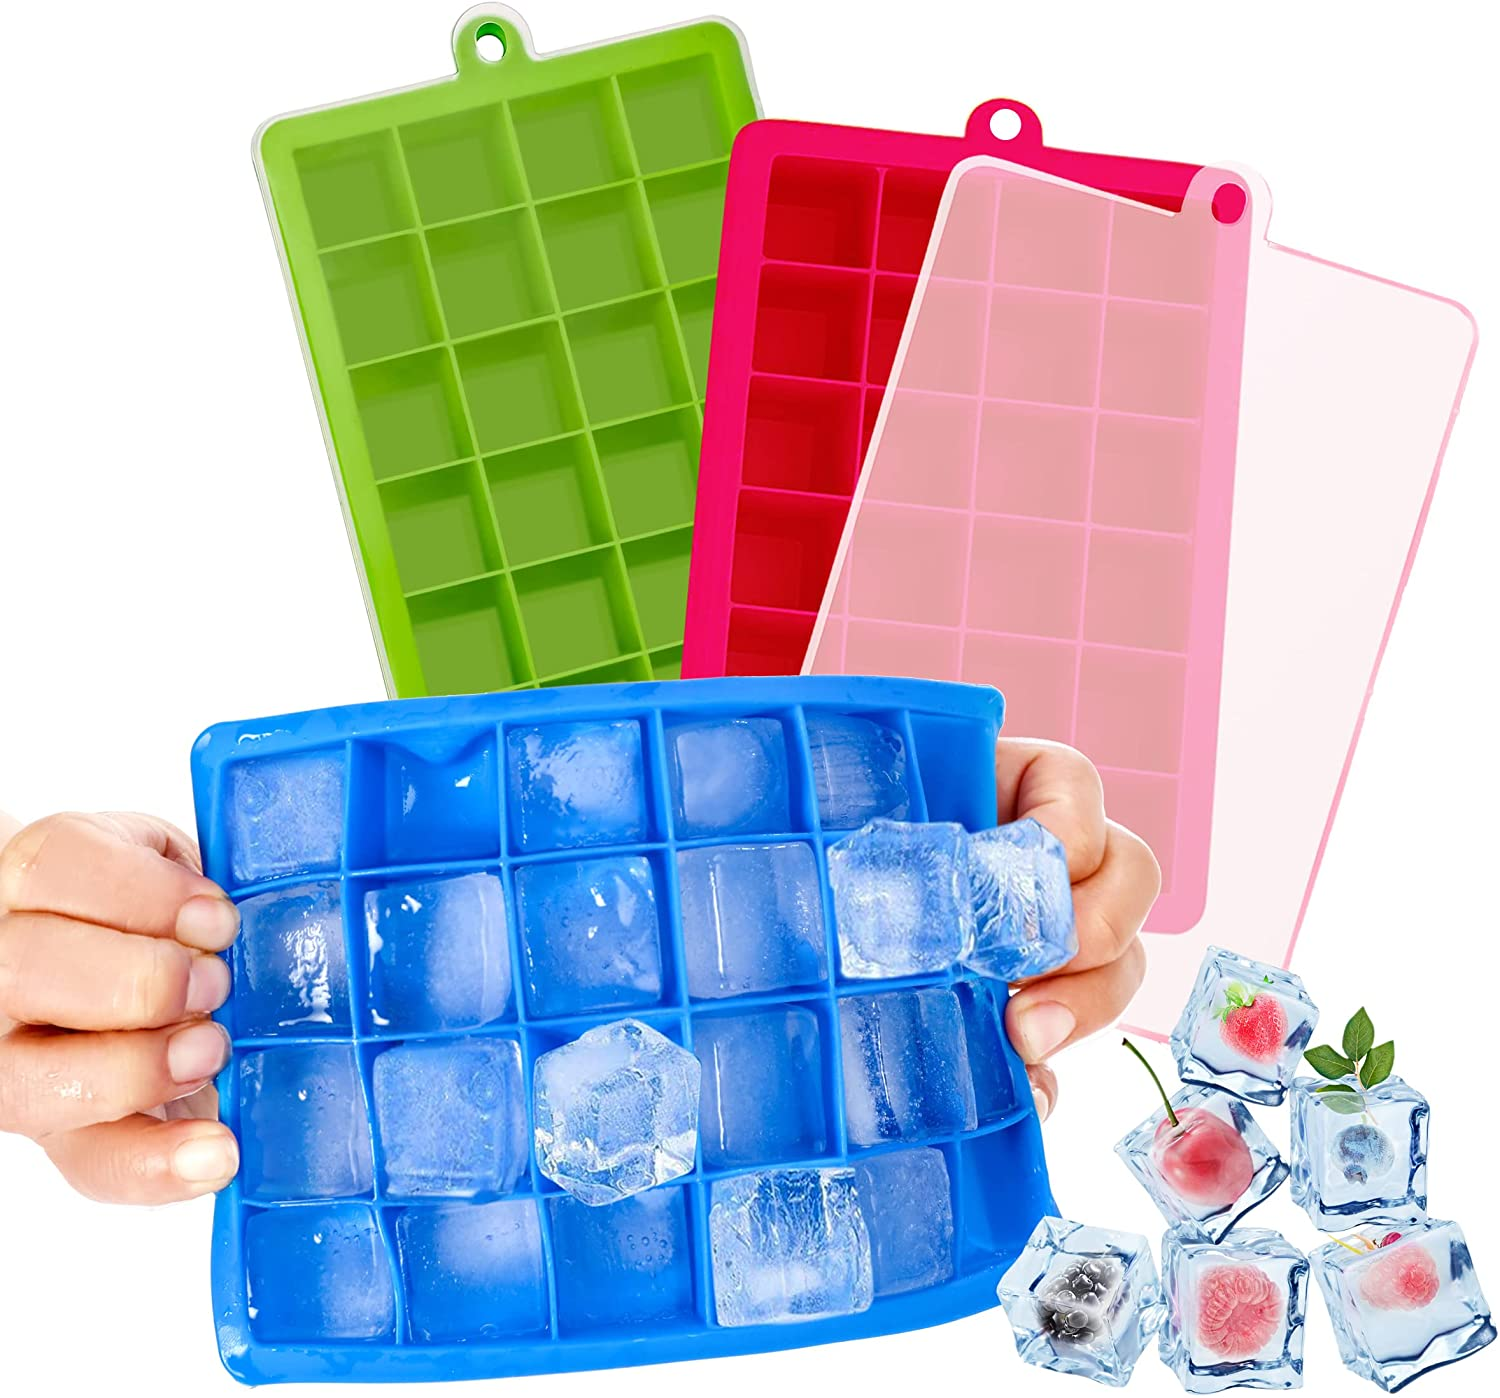 24 Cavity Silicone Ice Cube Tray with cover Featured Image